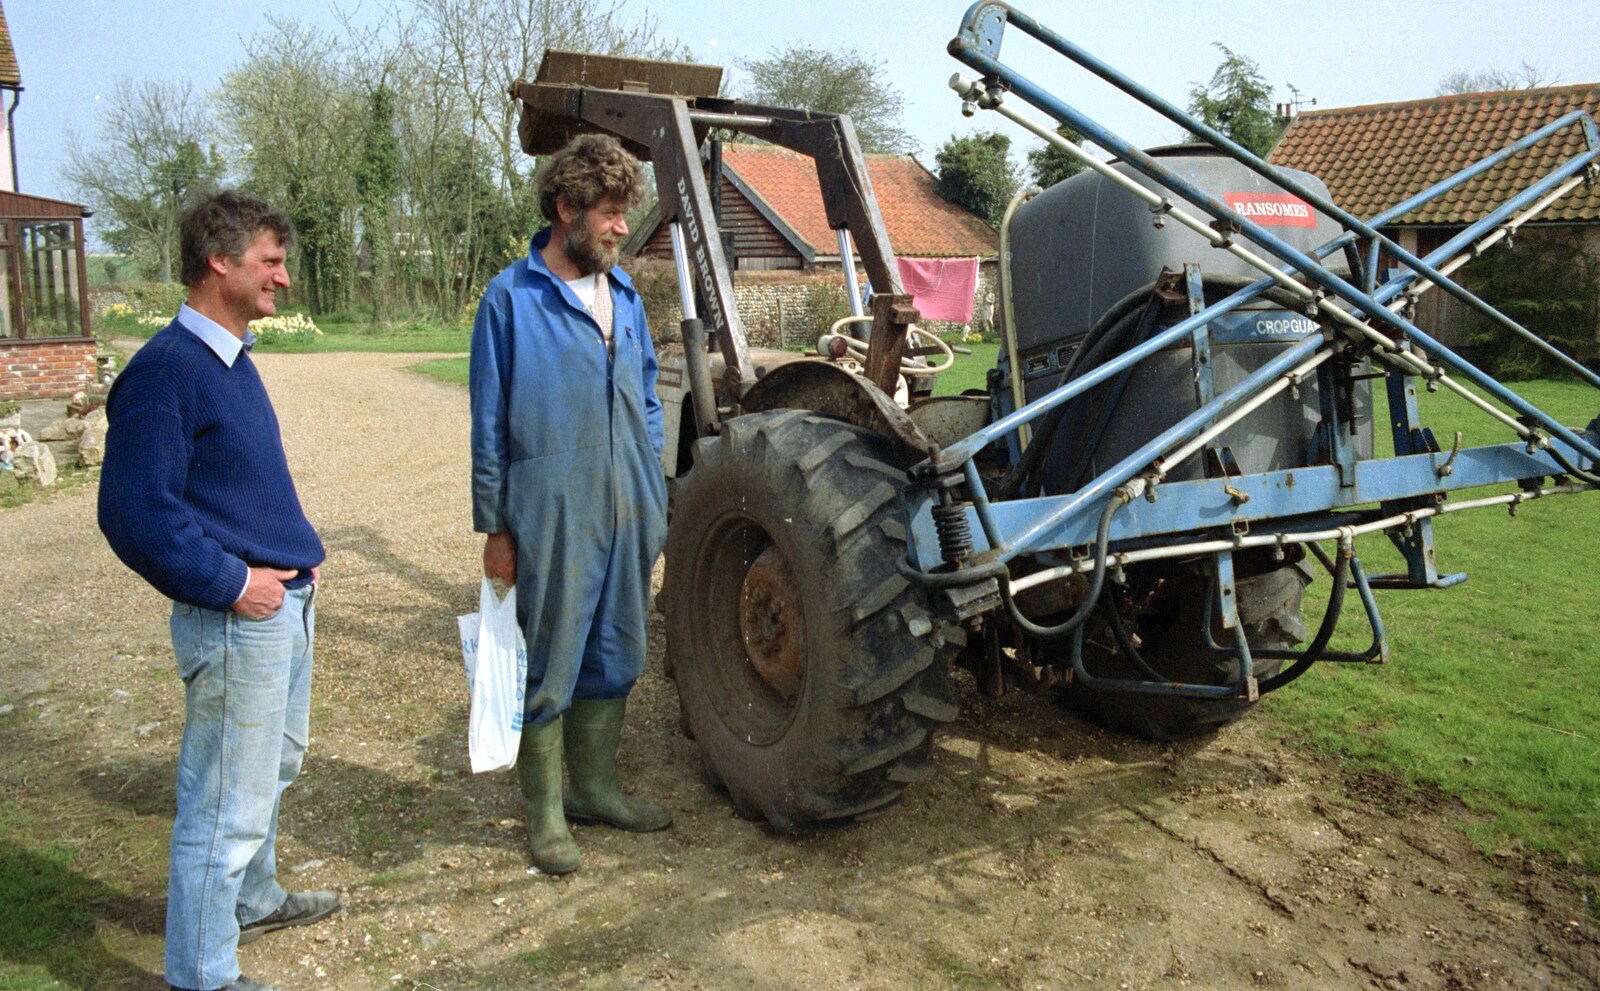 Mike shows off his tractor/sprayer combo from The Election Caravan and a View from a Cherry Picker, Stuston, Suffolk - 9th April 1992